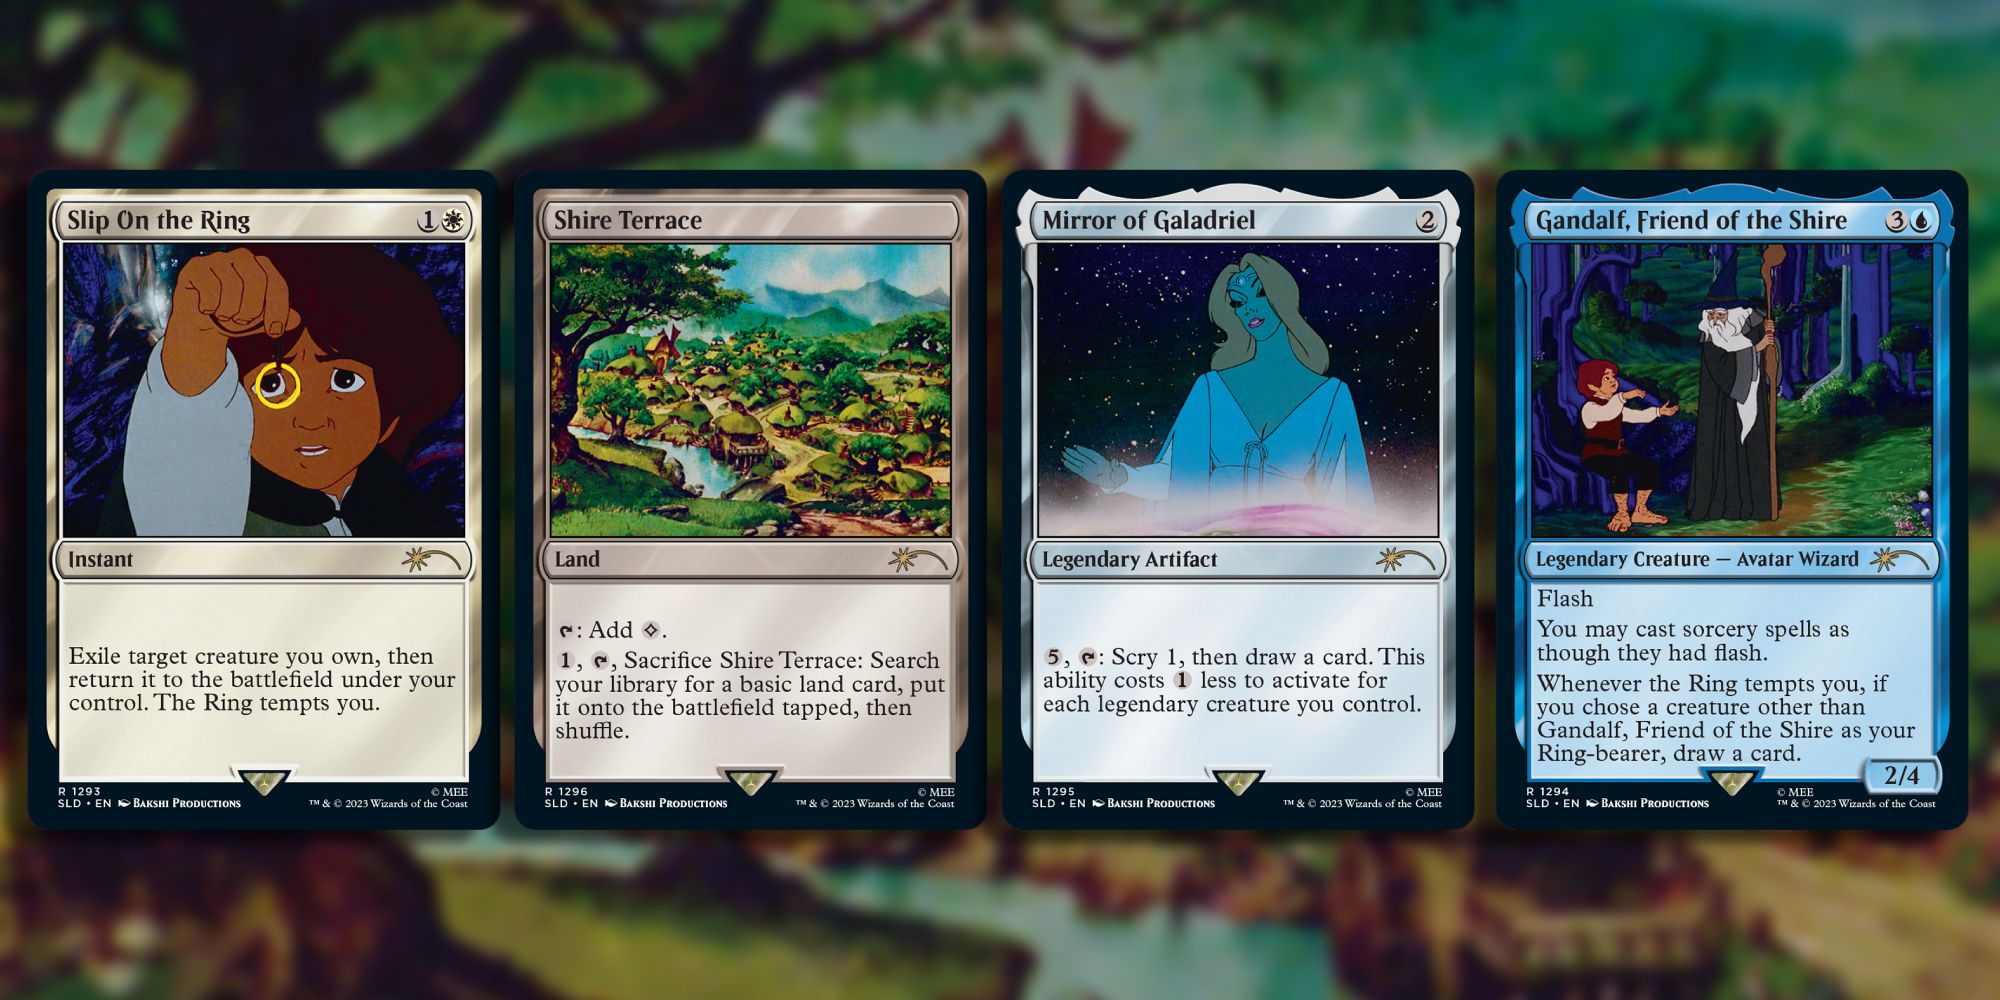 Image of the More Adventures in Middle-earth Secret Lair card in Magic: The Gathering, with artwork by Bakshi Production